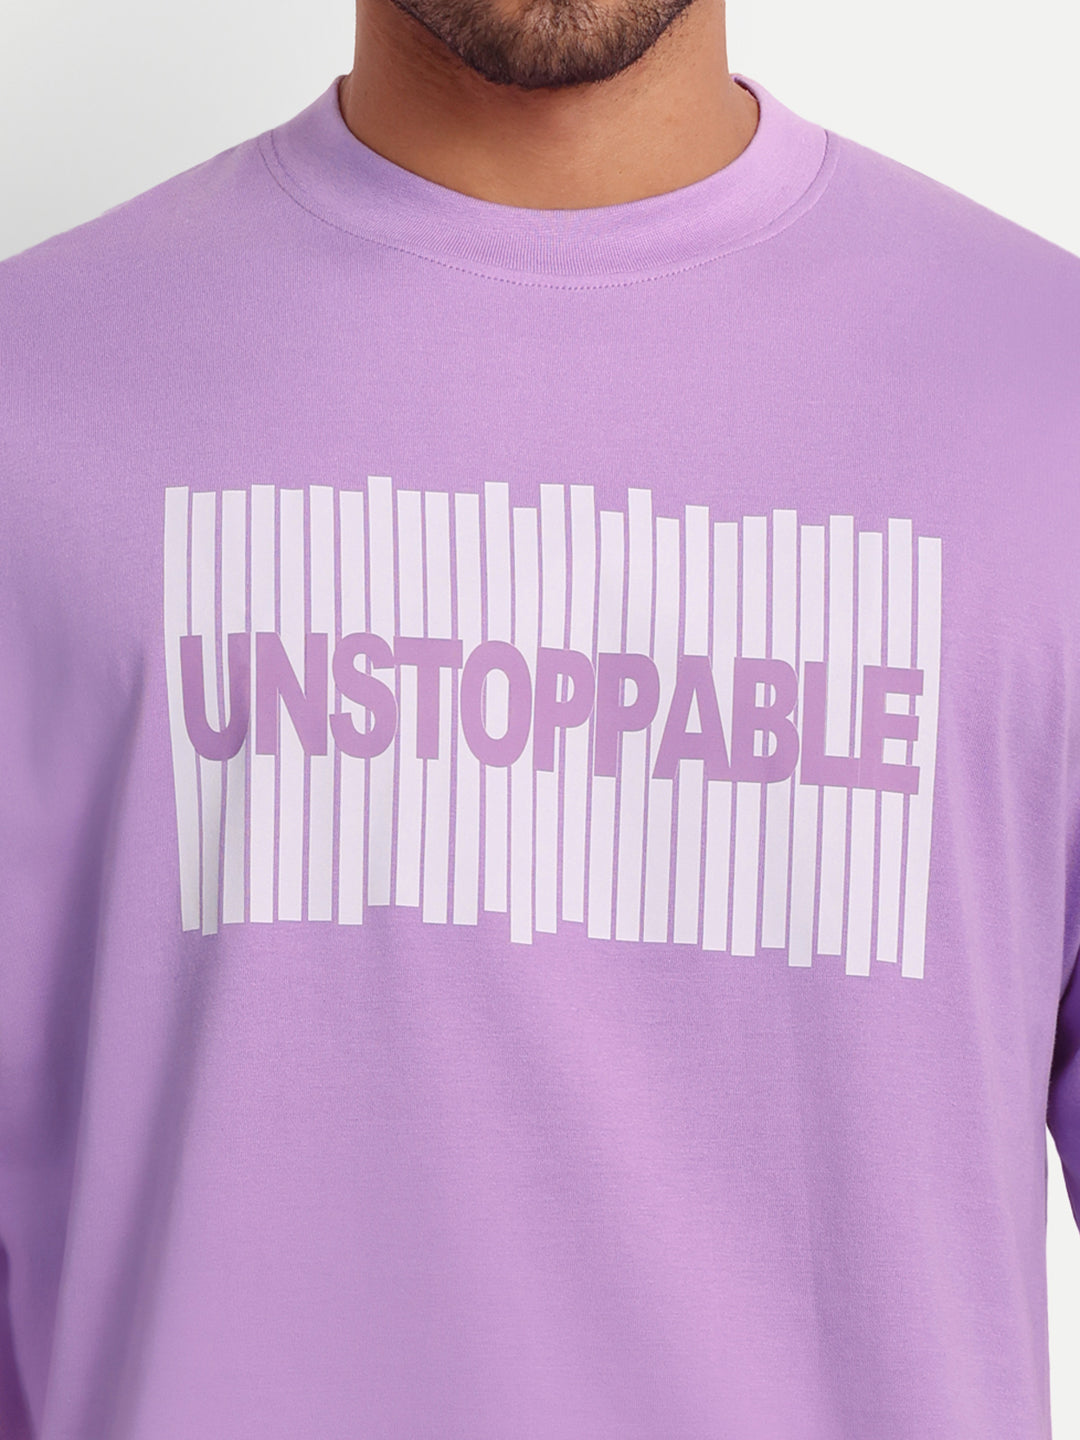 Unstoppable Lavender Oversized Tee by Gavin Paris